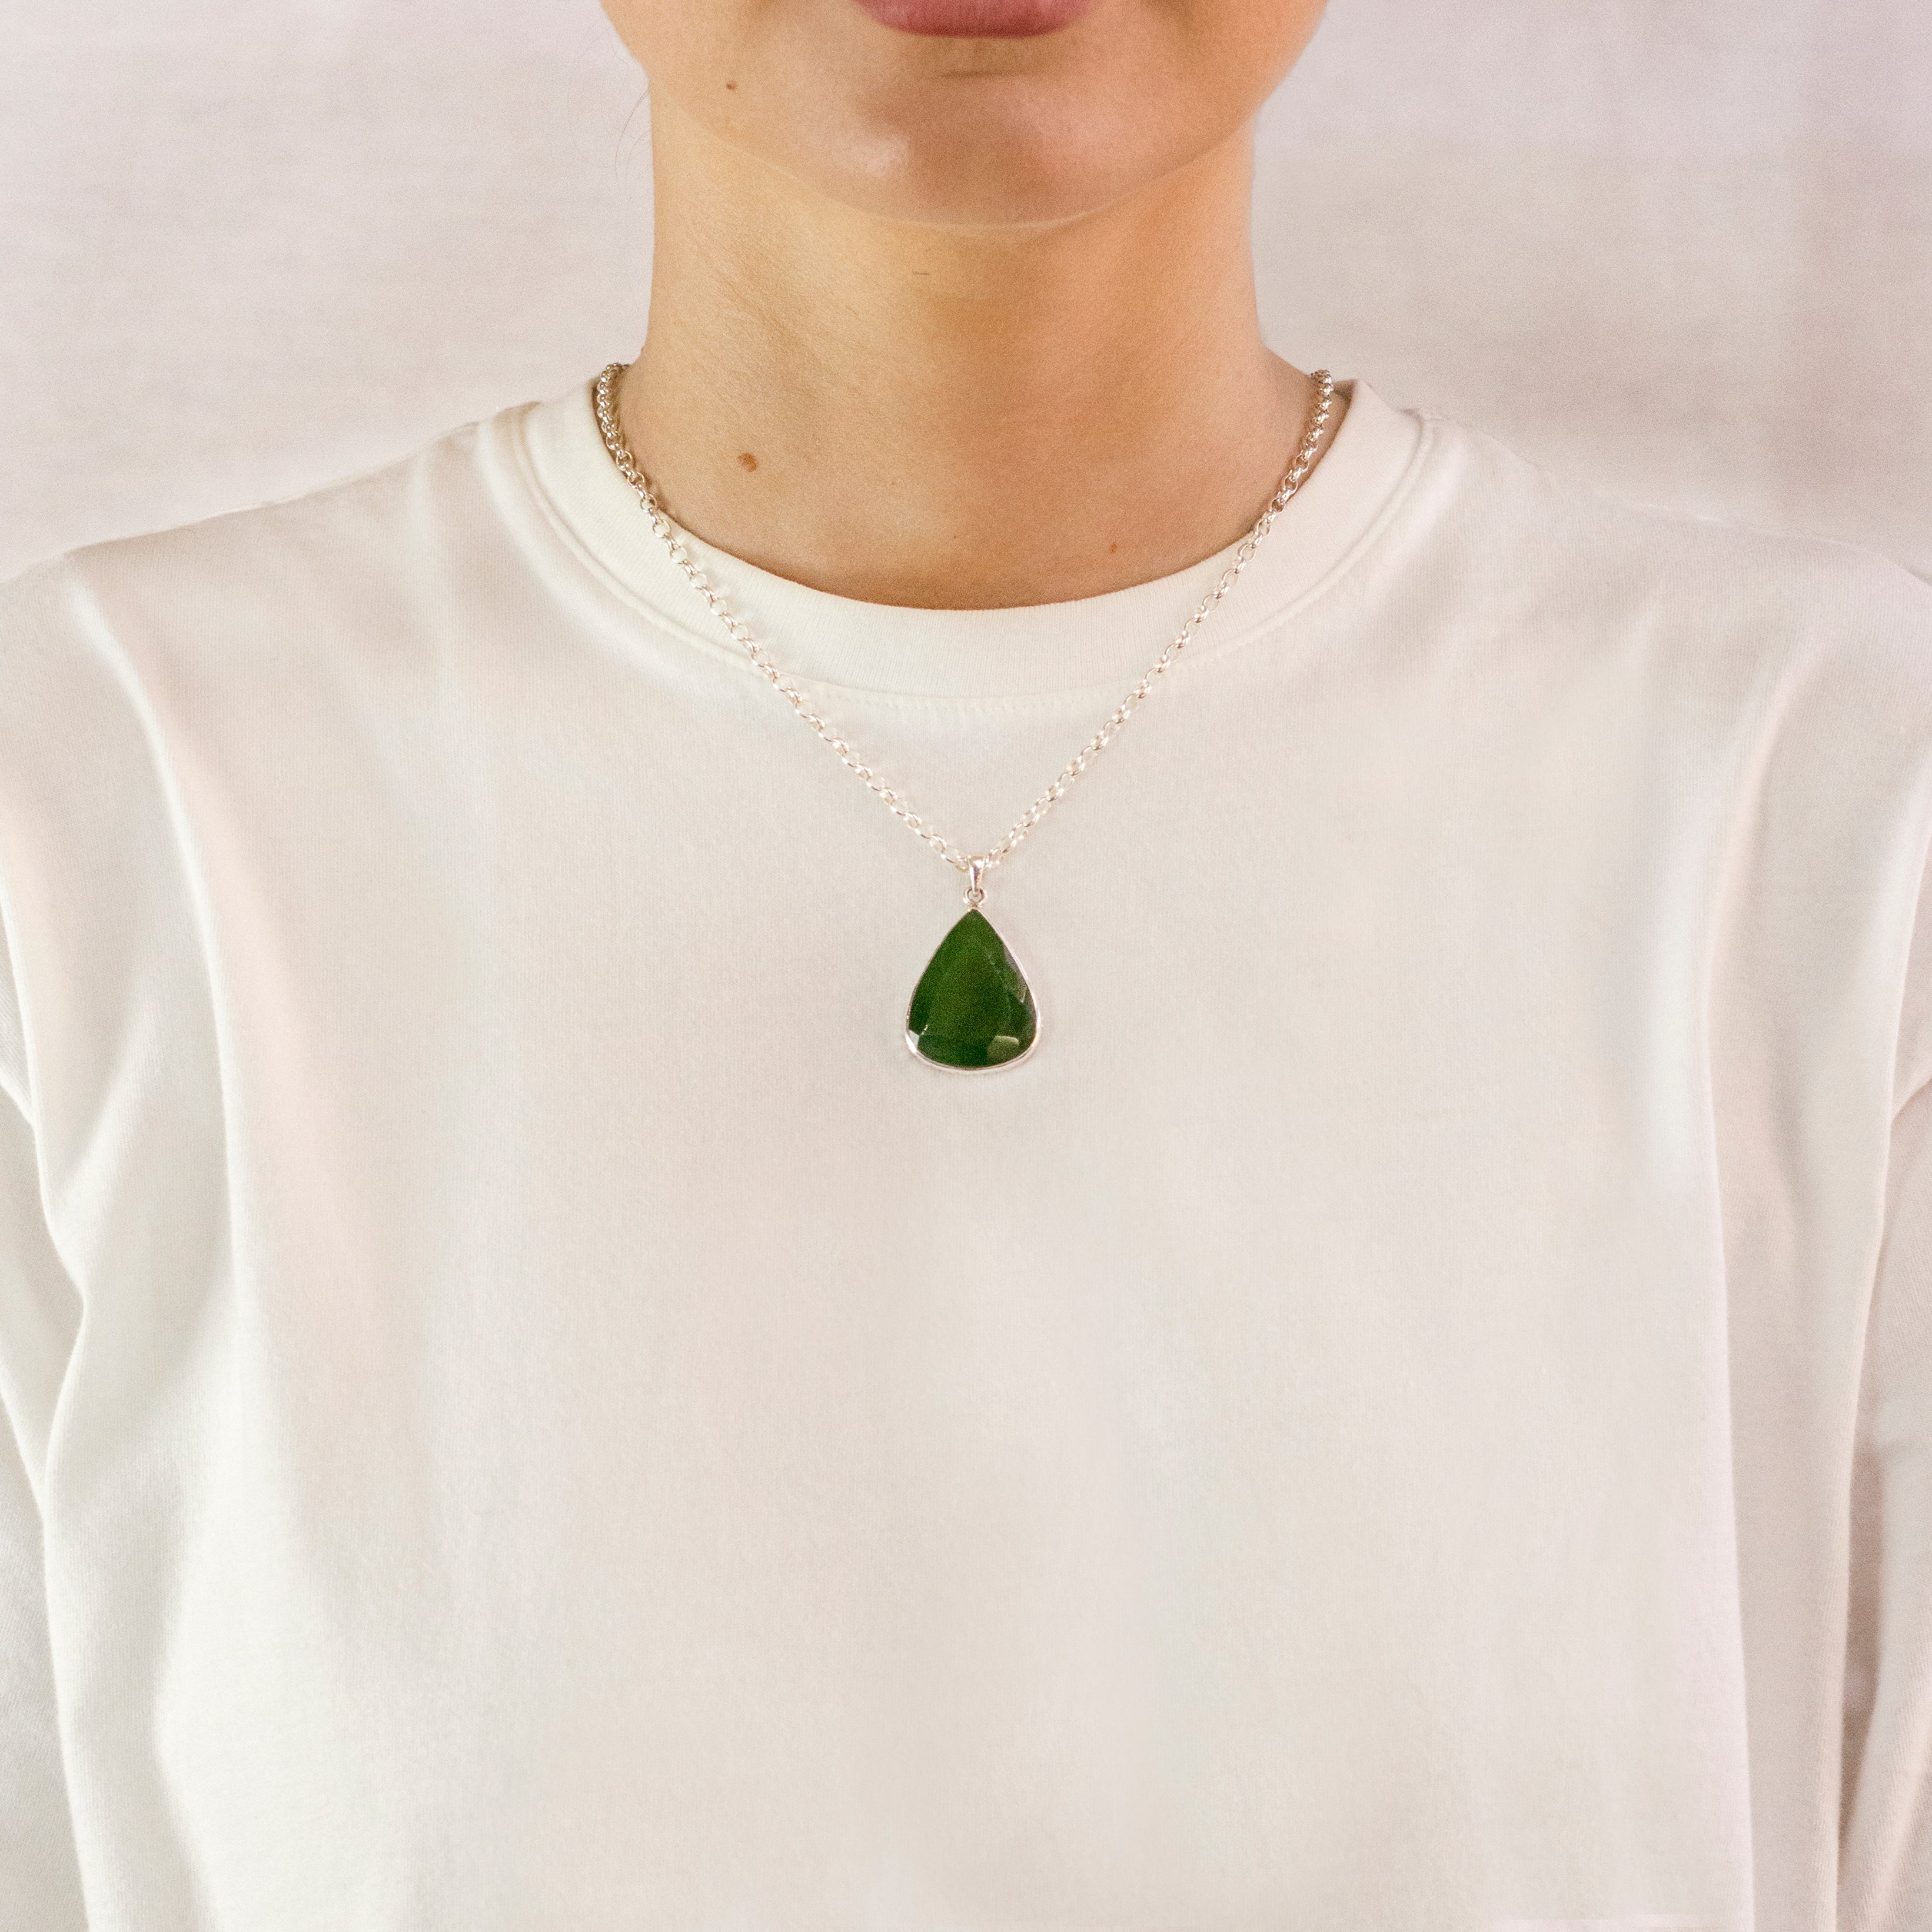 Green Faceted Tear Nephrite Jade Necklace on model